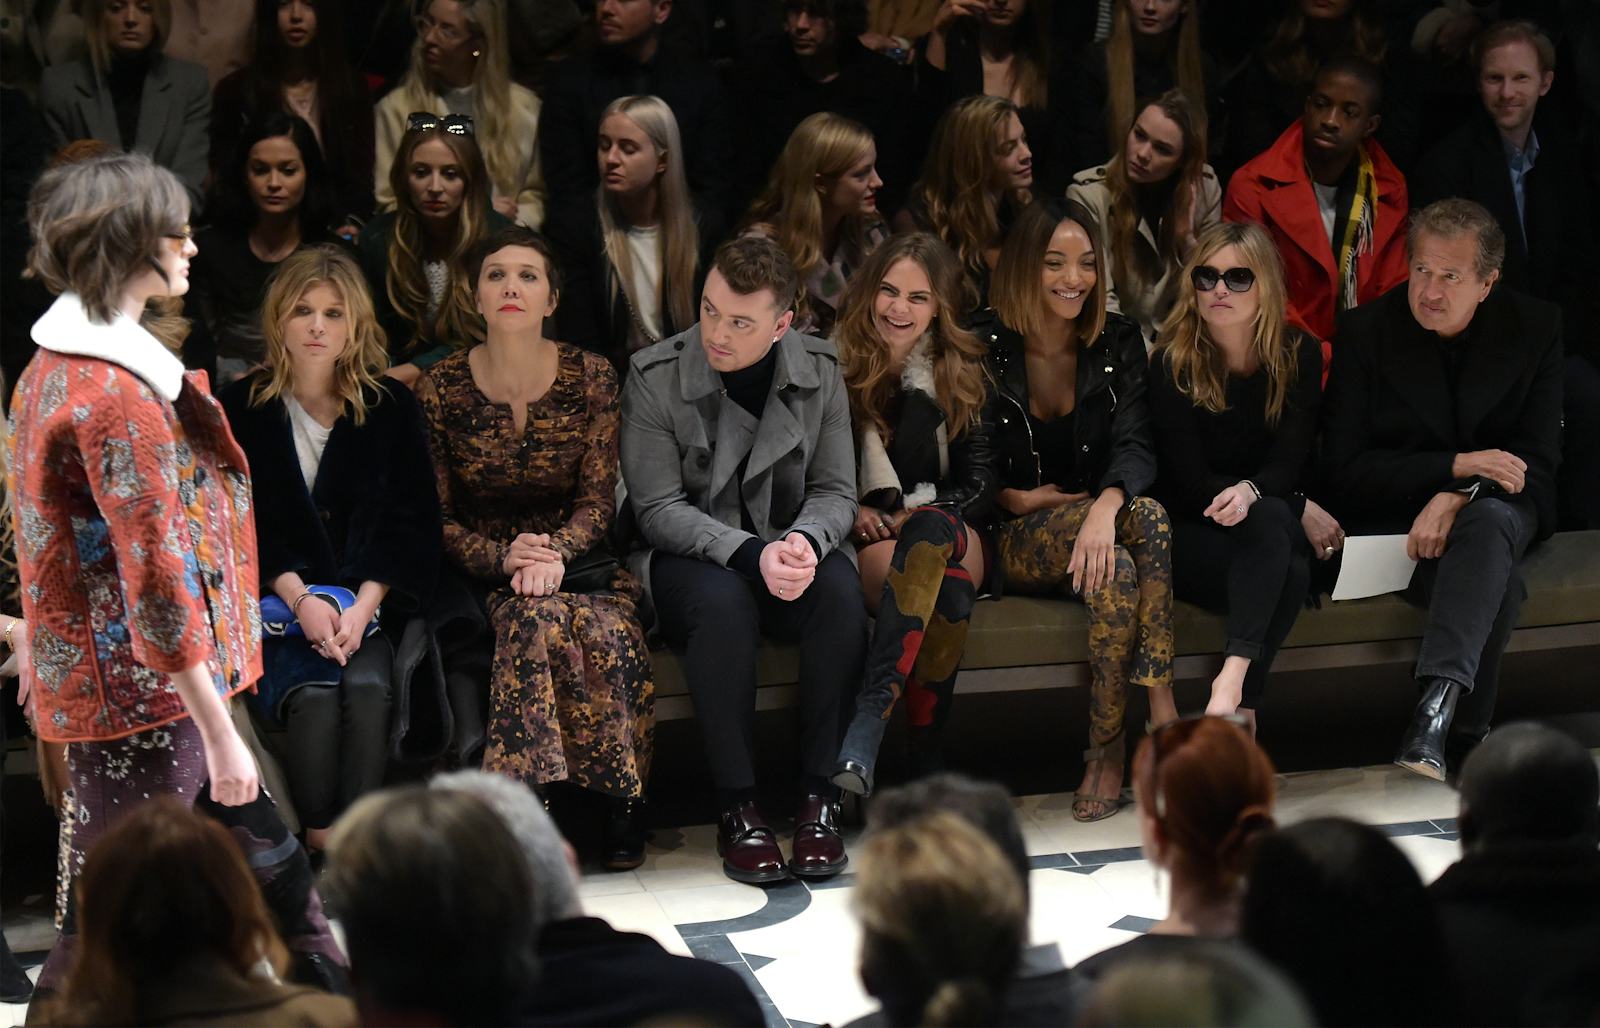 Are Top Models More Valuable As Front Row Celebs?